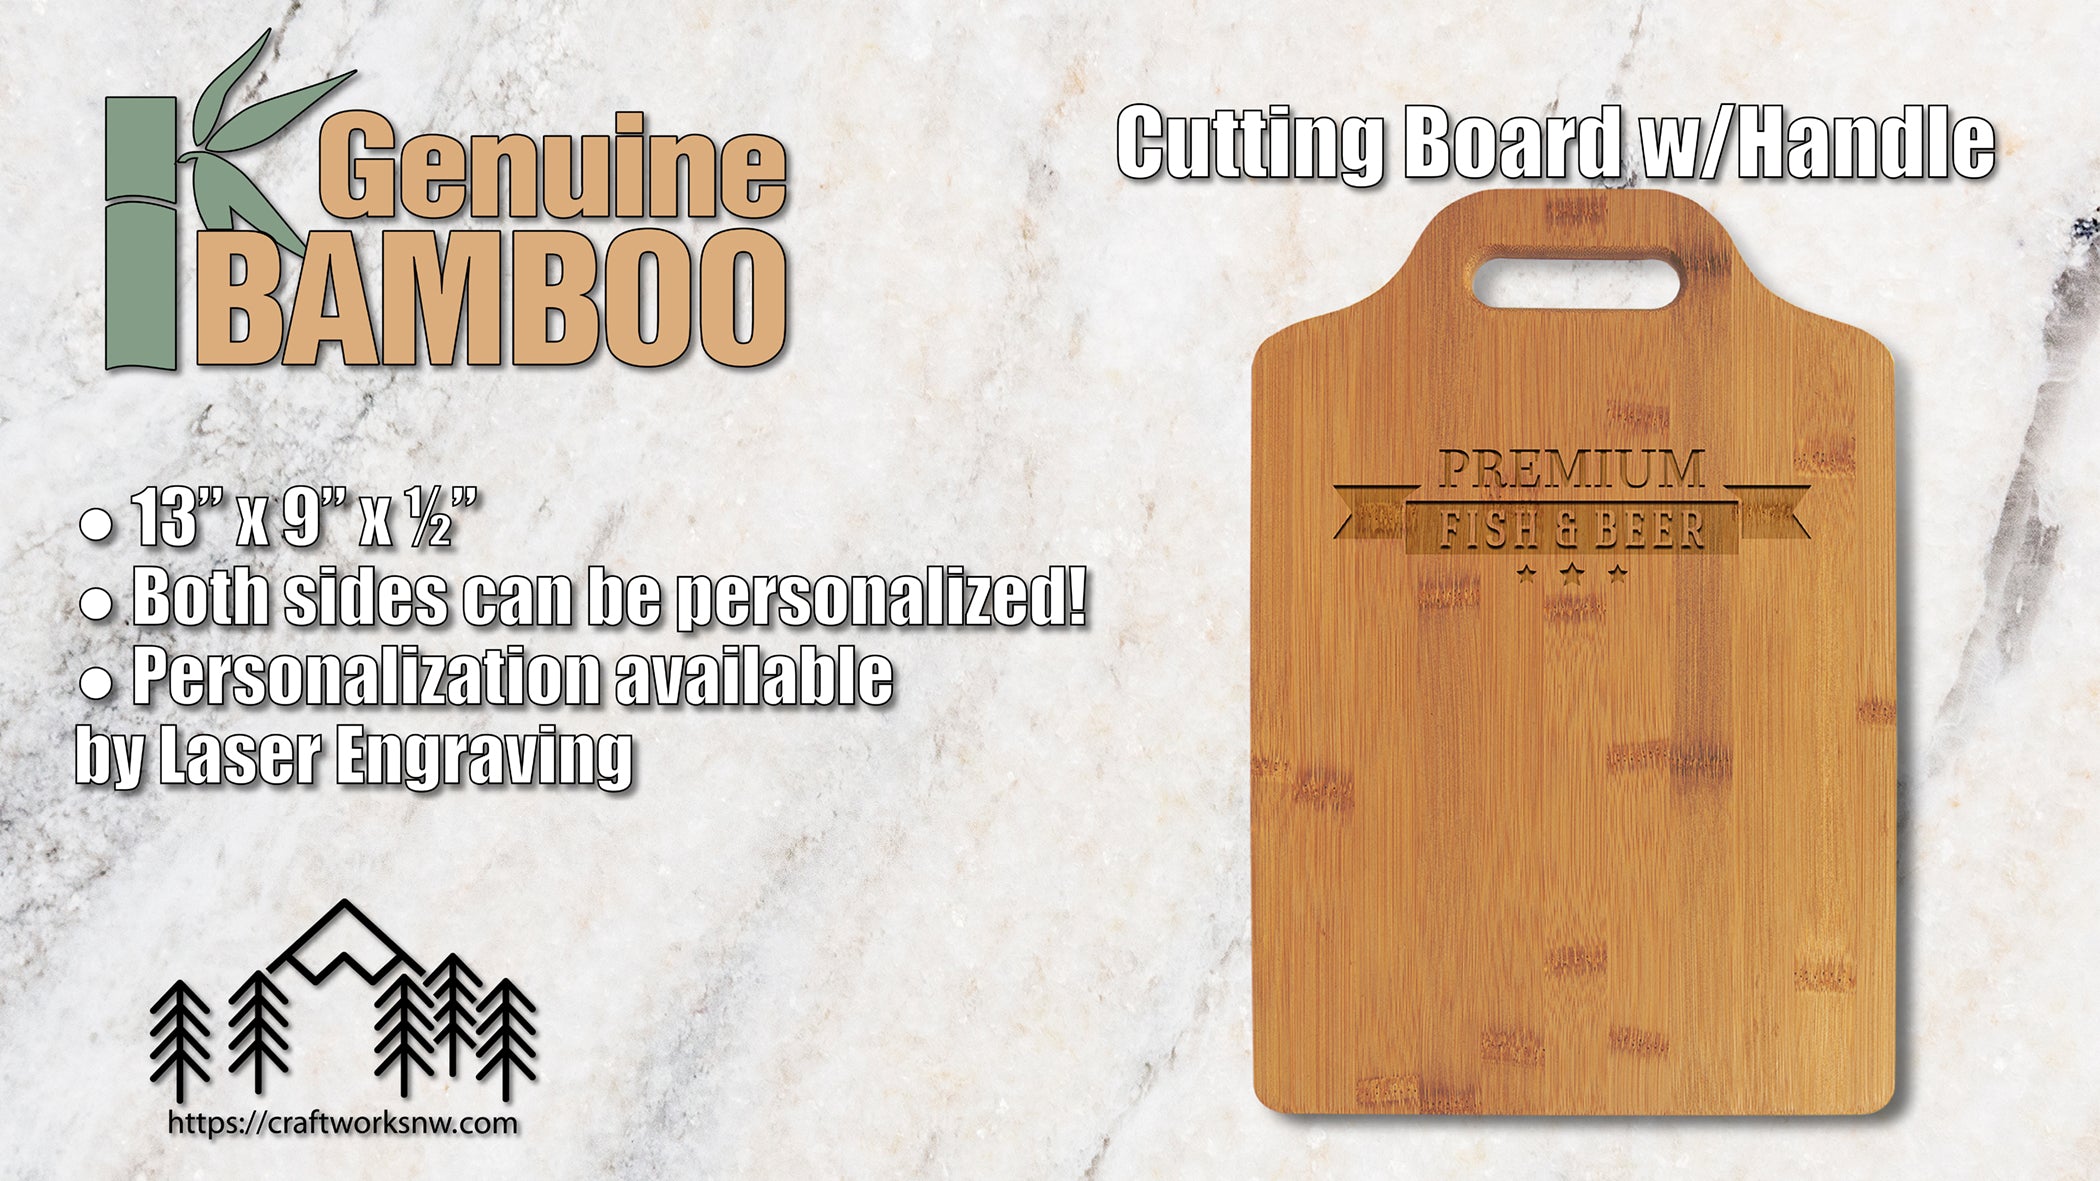 Cutting Board with Handle, Bamboo, 13" x 9", Laser Engraved - Craftworks NW, LLC